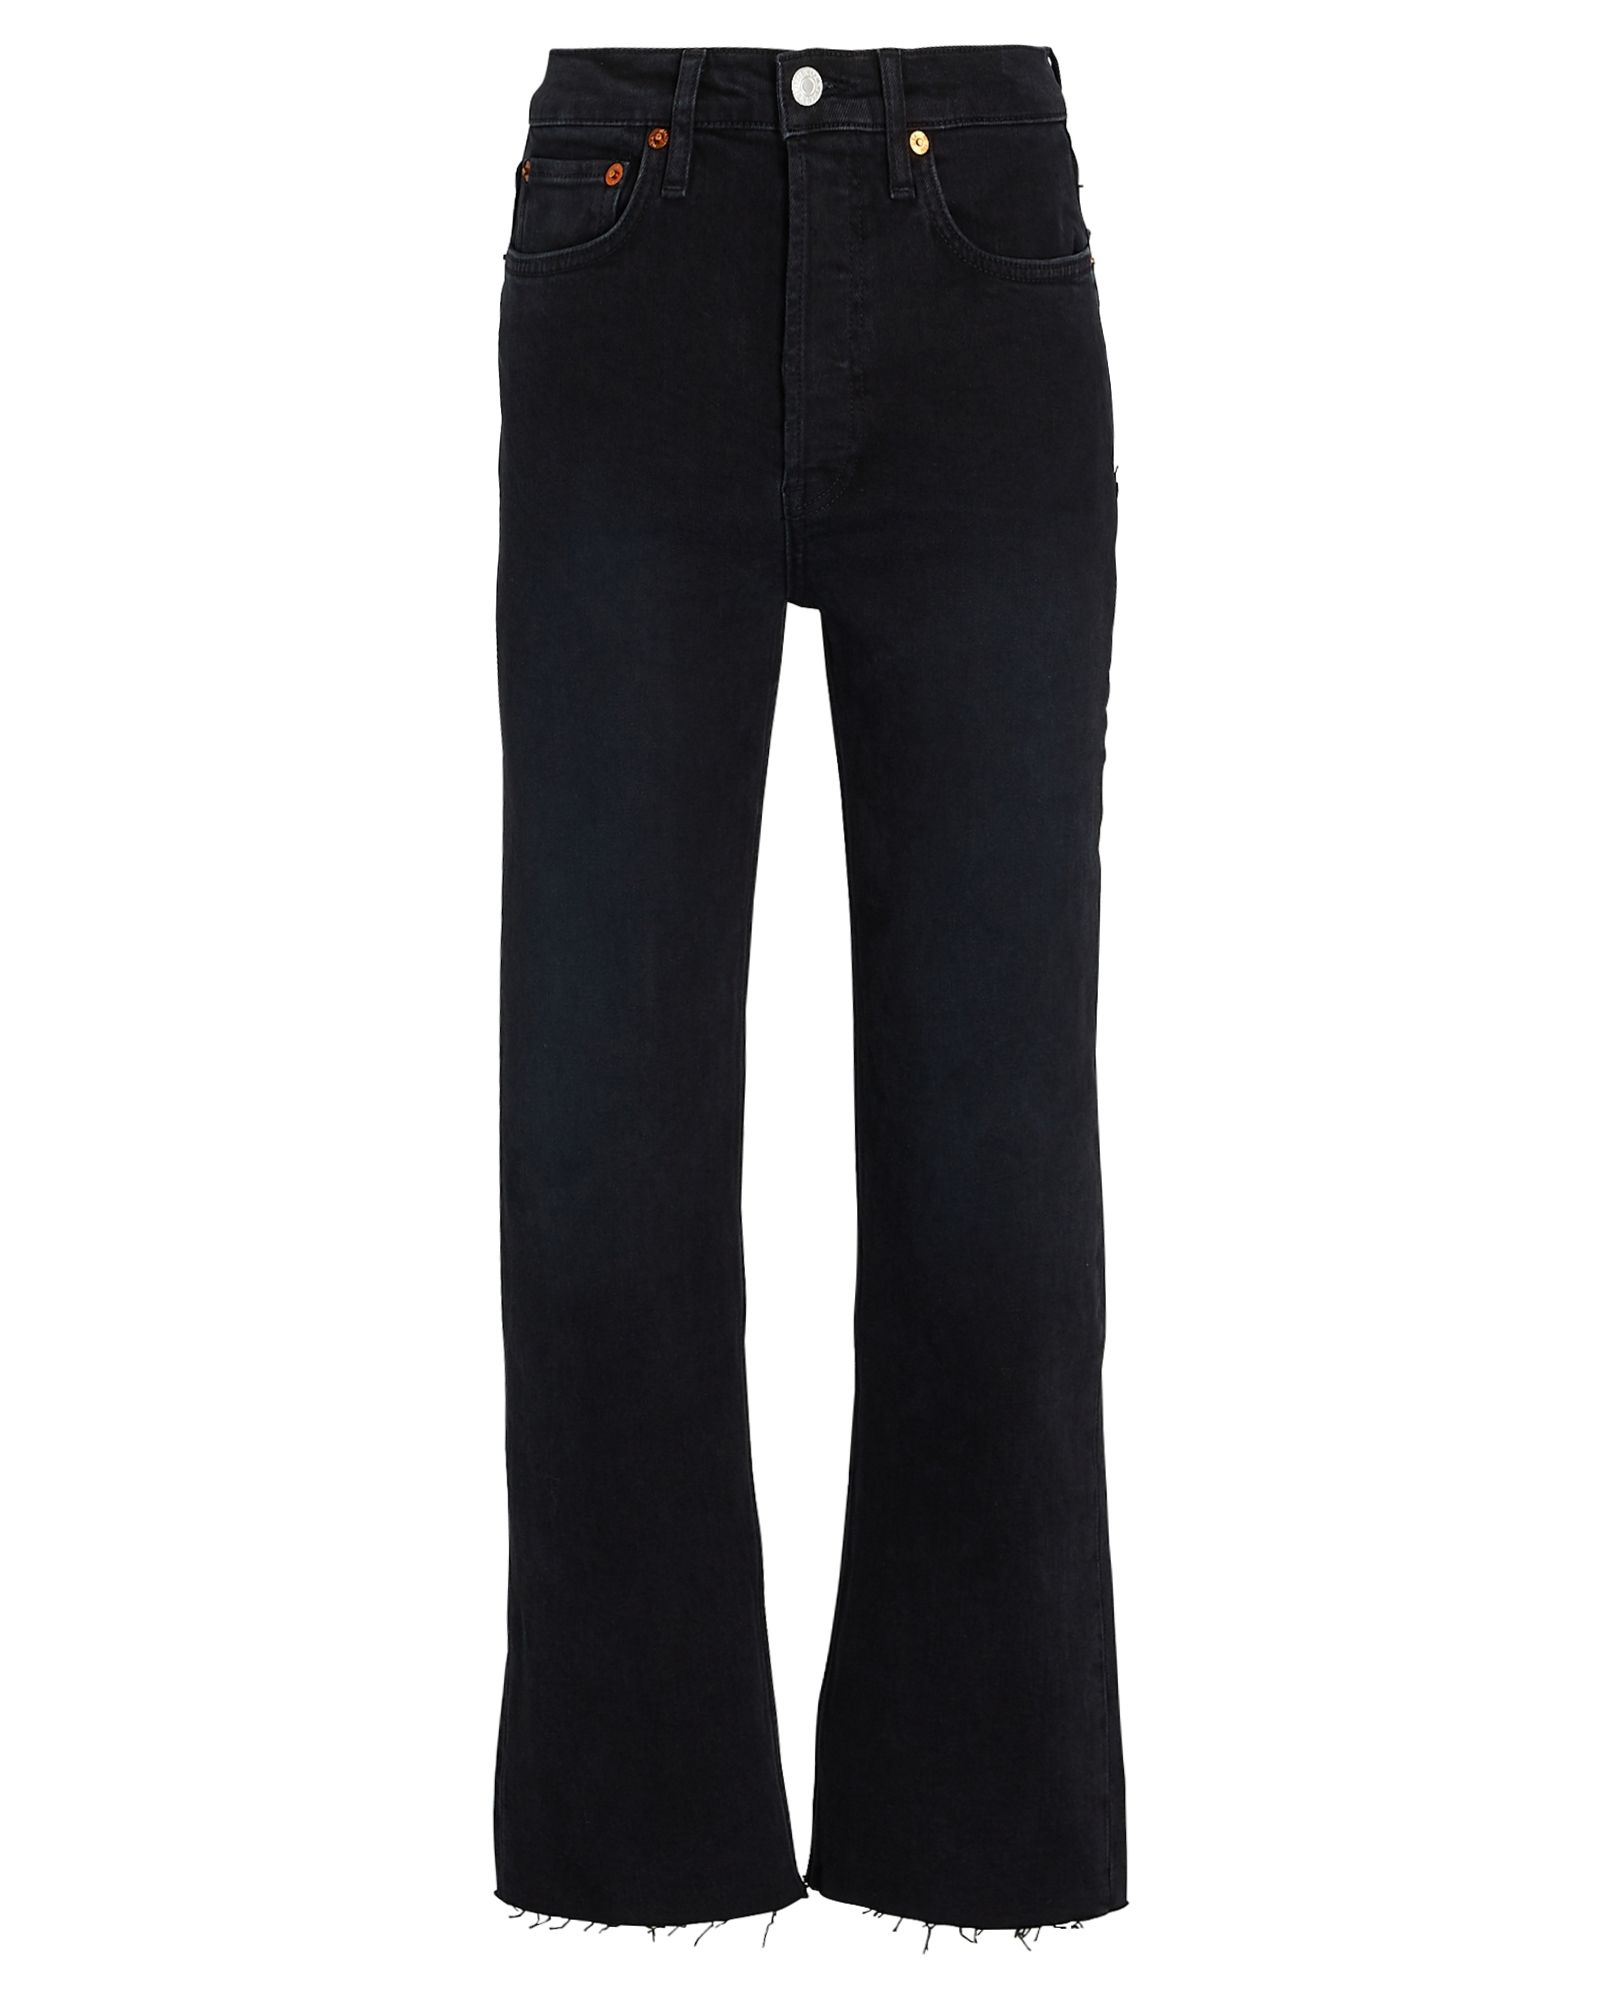 RE/DONE 70s High-Rise Stove Pipe Jeans, Faded Black 85 26 | INTERMIX